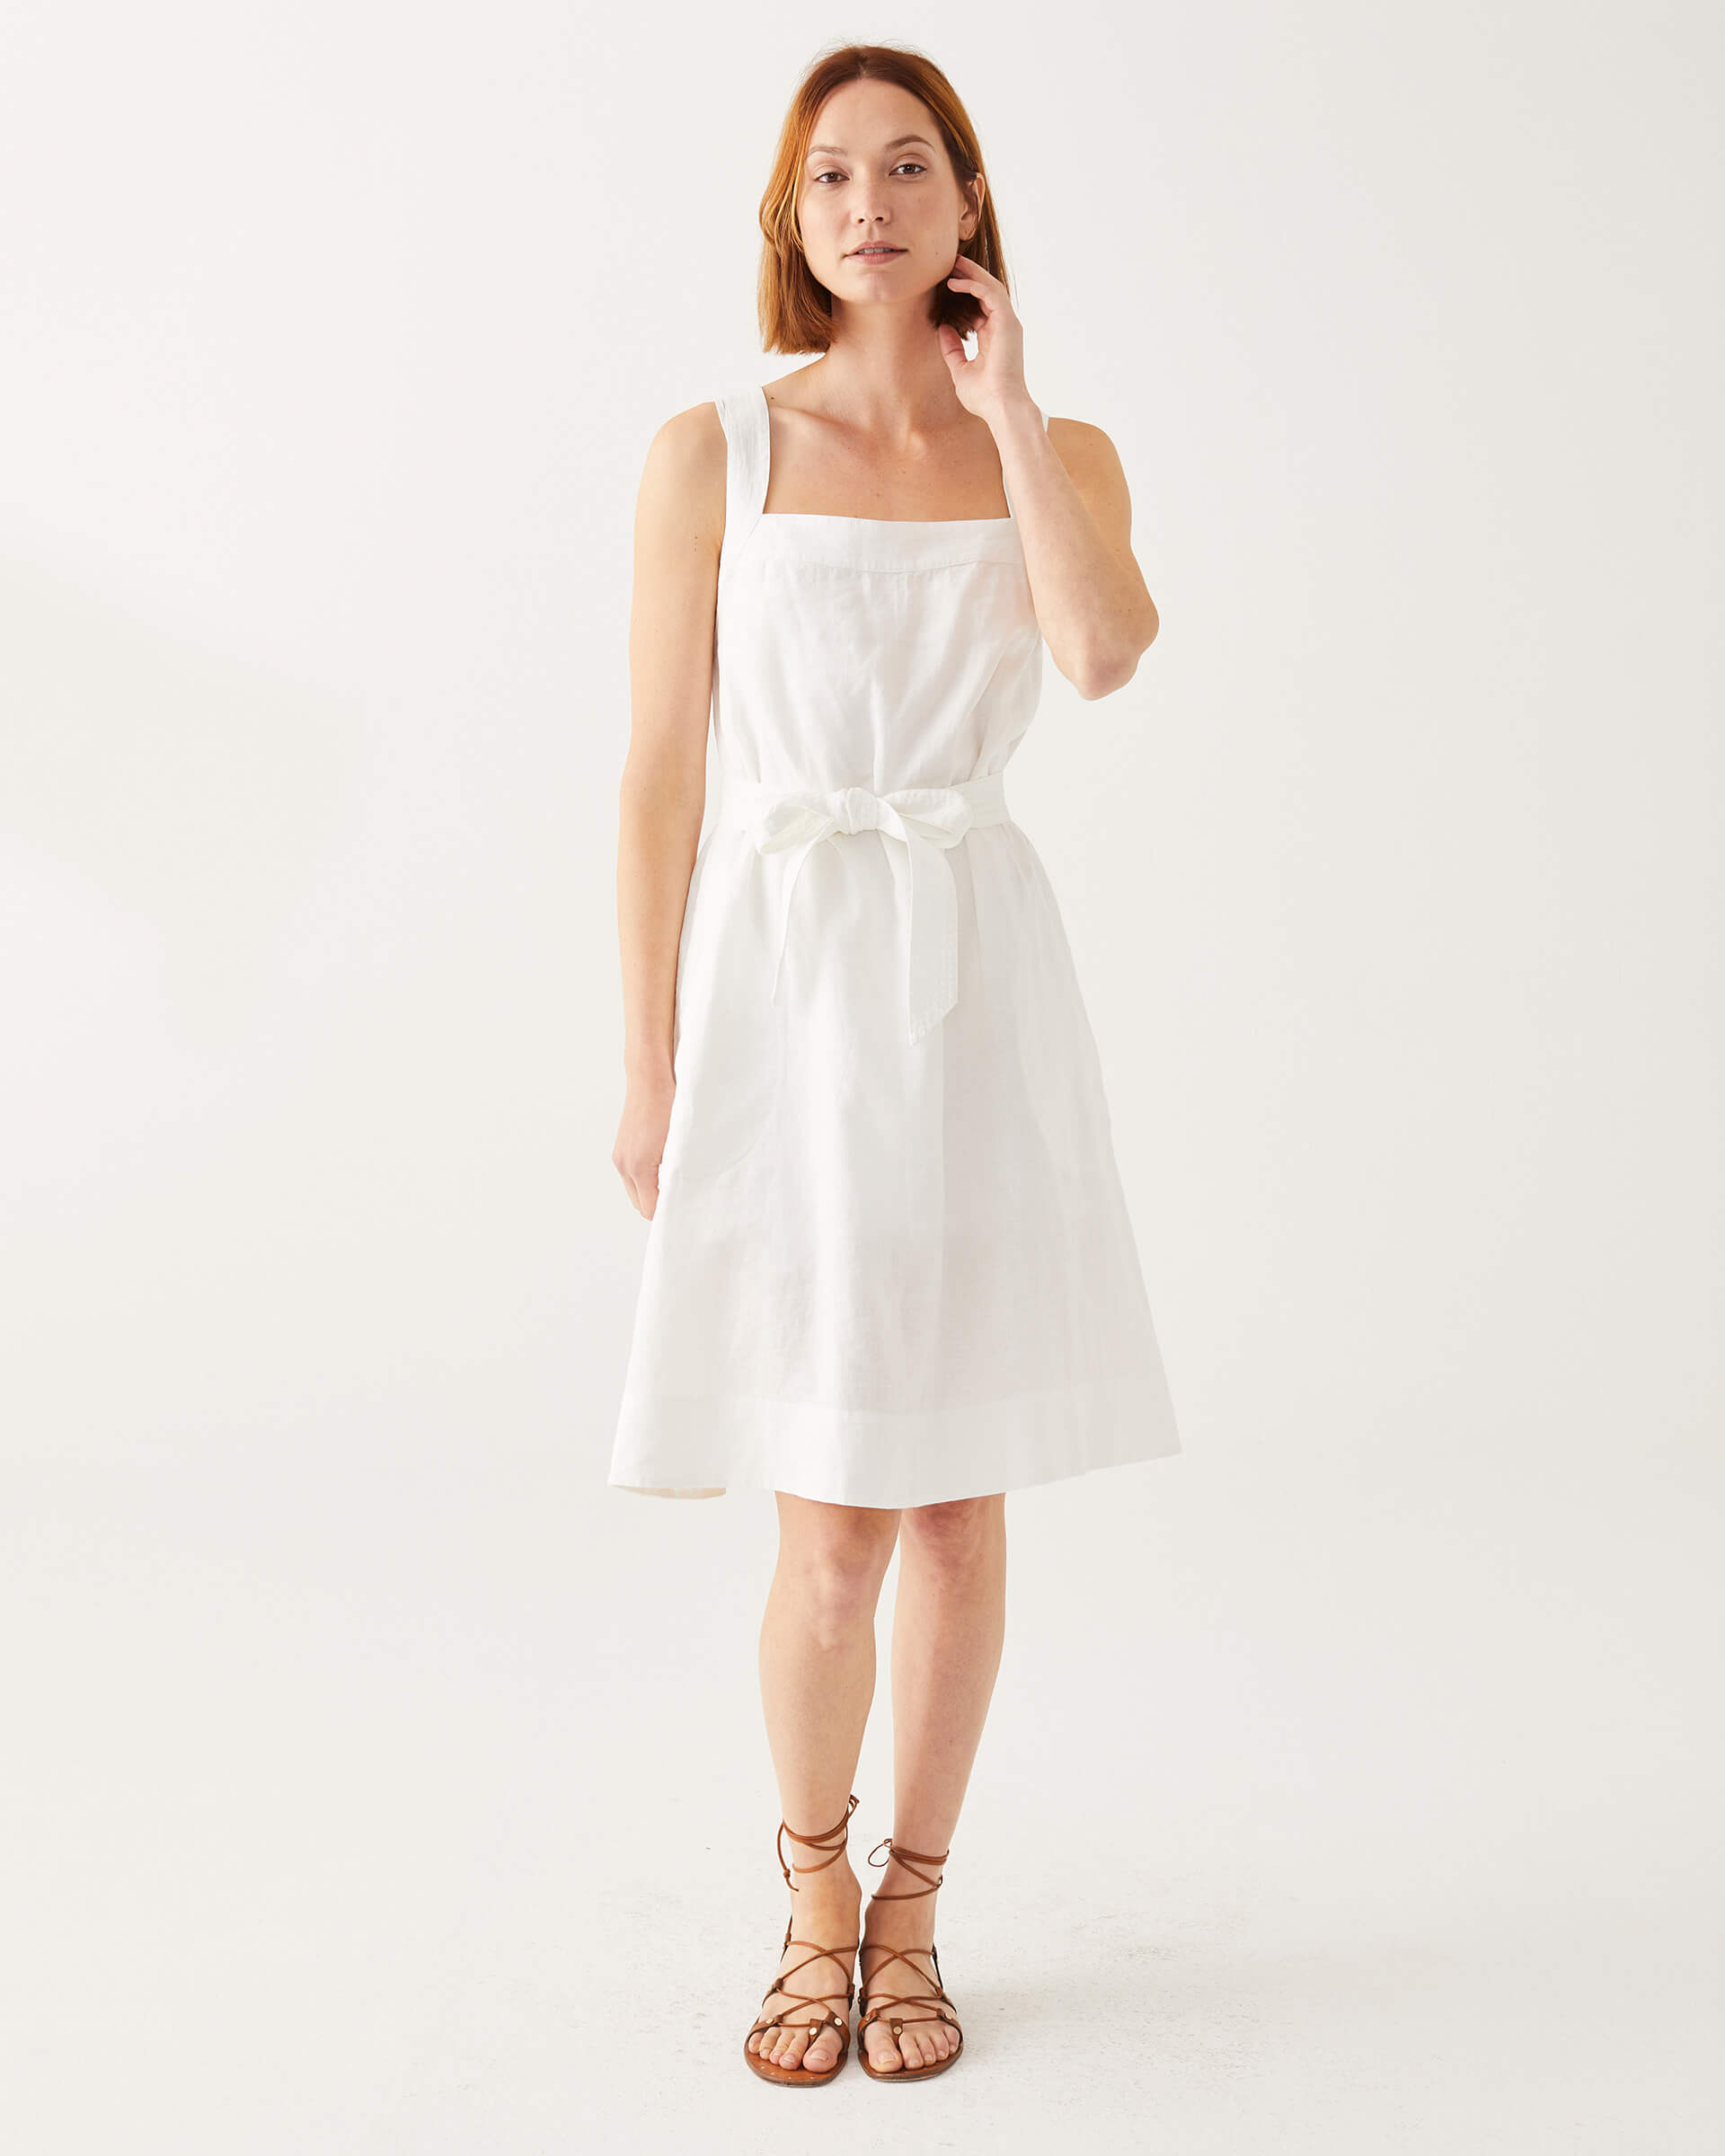 female wearing white A-line linen sundress with self-belt standing on a white background